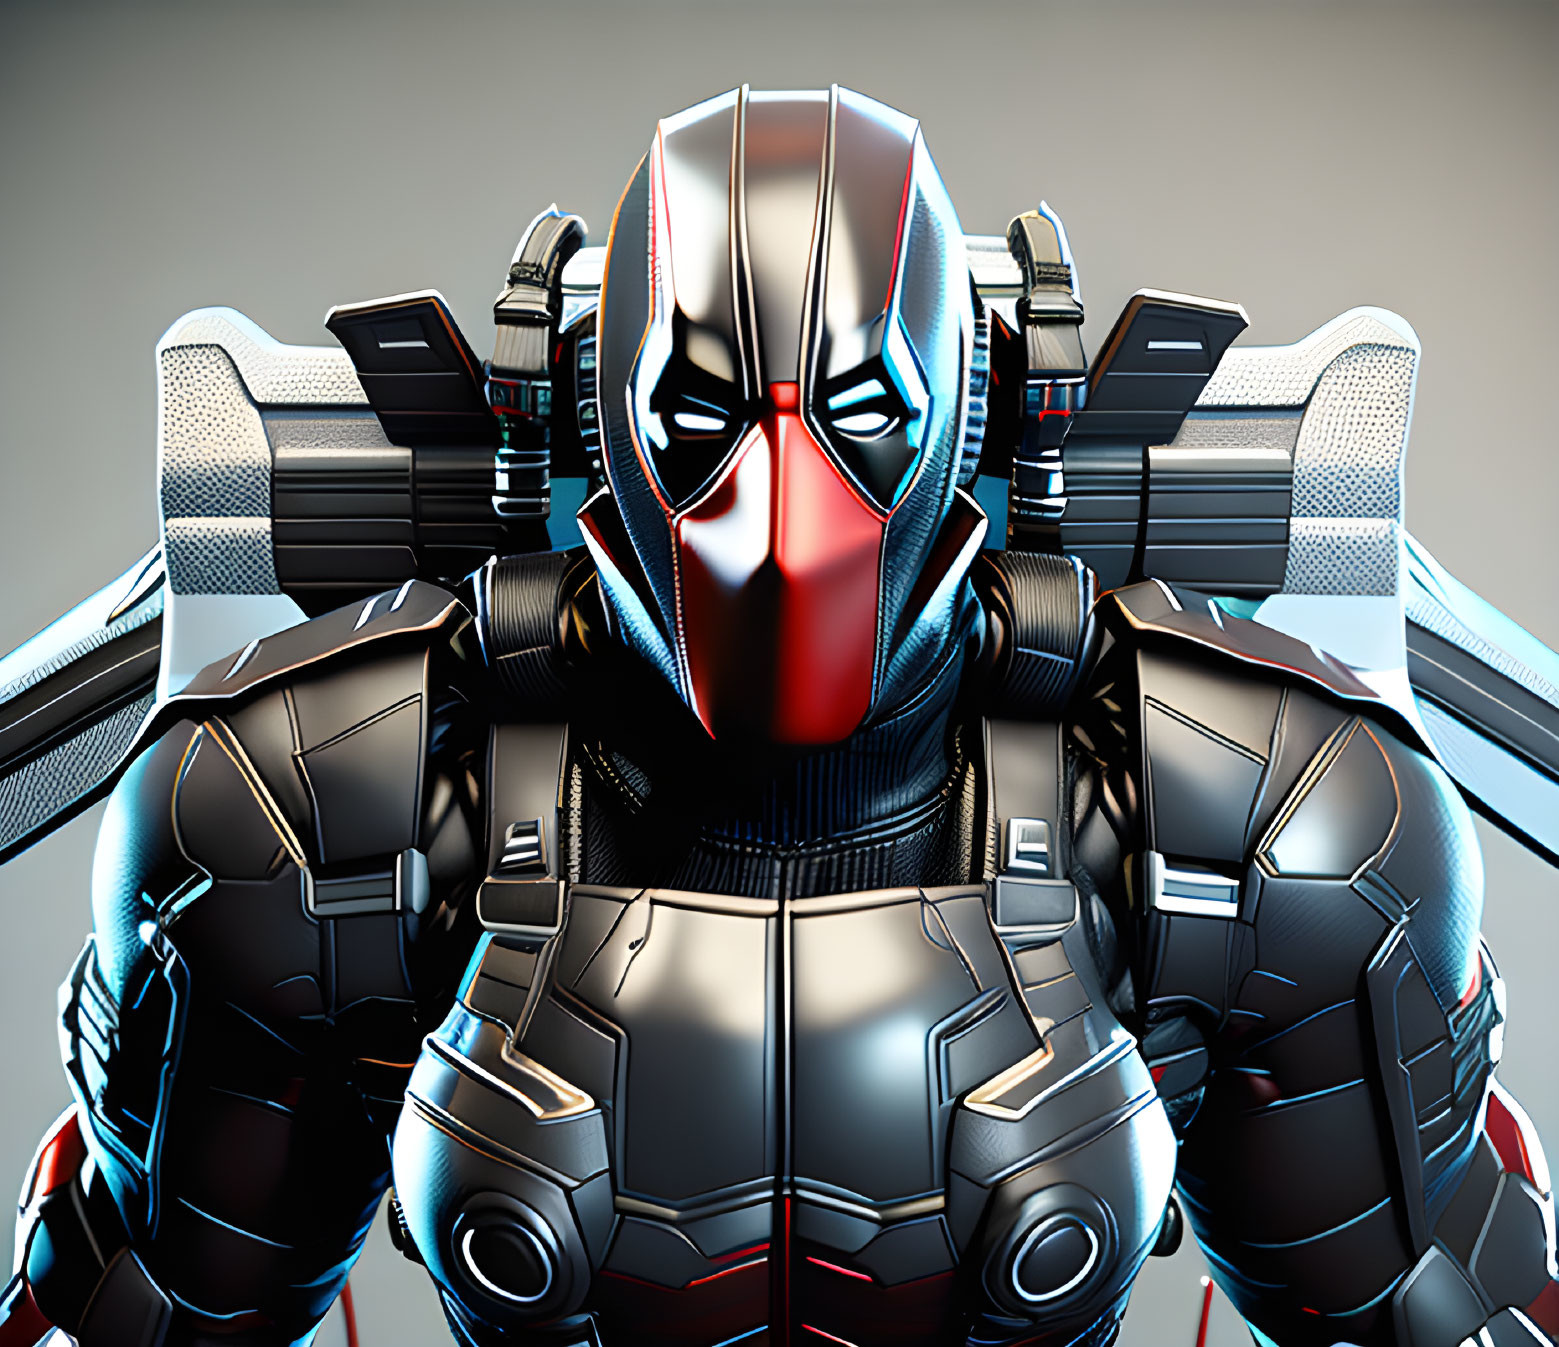 Futuristic armored character with black and red helmet and mechanical wings